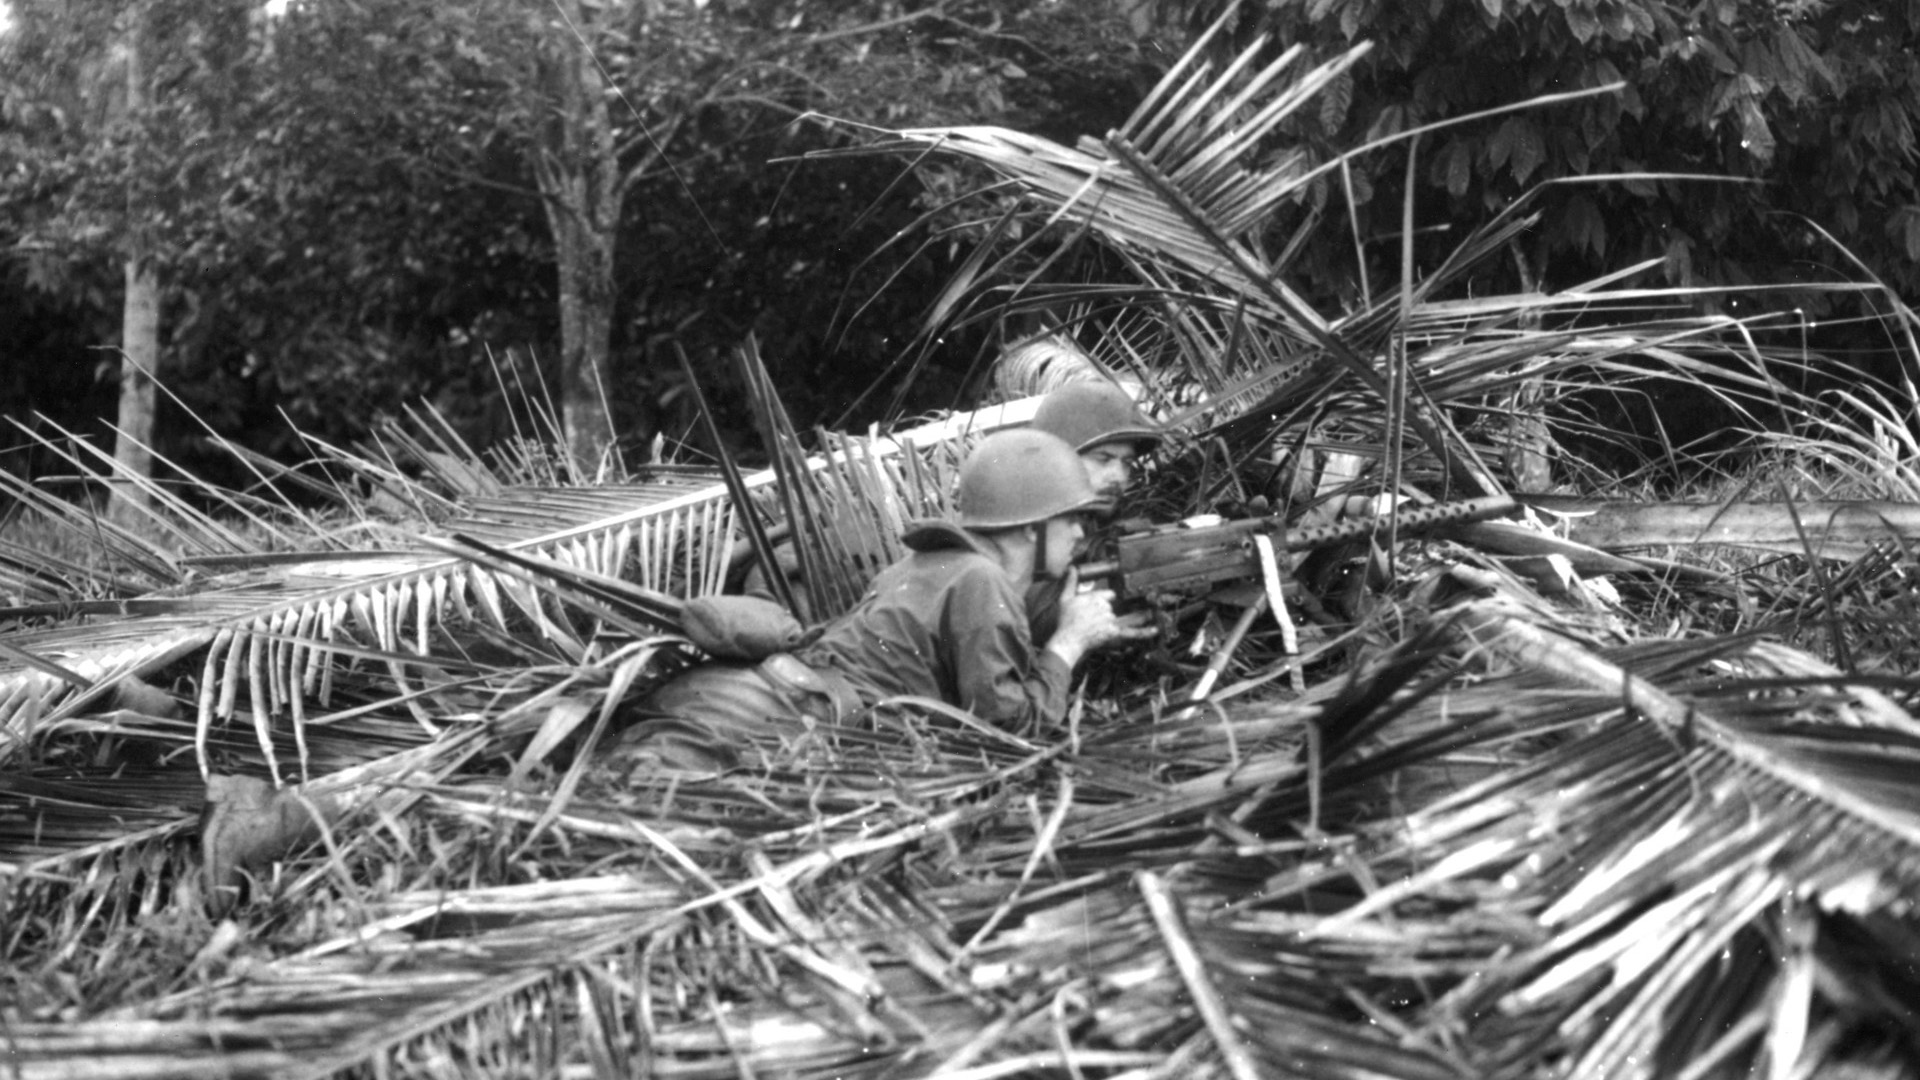 A Marine Raider machine-gun crew uses palm fronds to camouflage its position during intense training prior to the Makin Raid. The Marines fought heroically against a stout Japanese garrison on the atoll and withdrew after controversially considering surrender to the enemy.